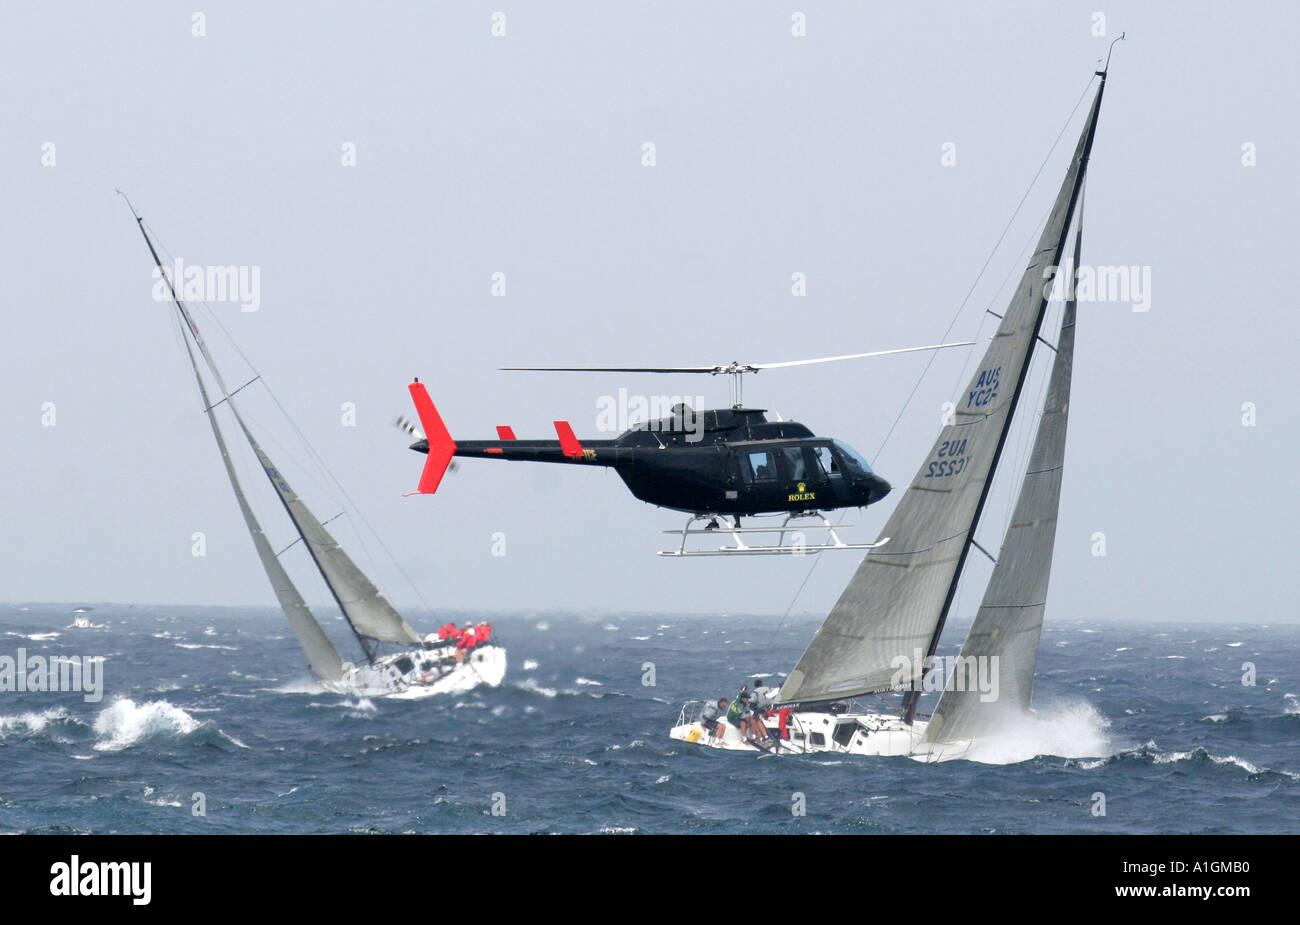 Helicopter films Farr Rolex 40 yachts off Sydney 2005 Stock Photo